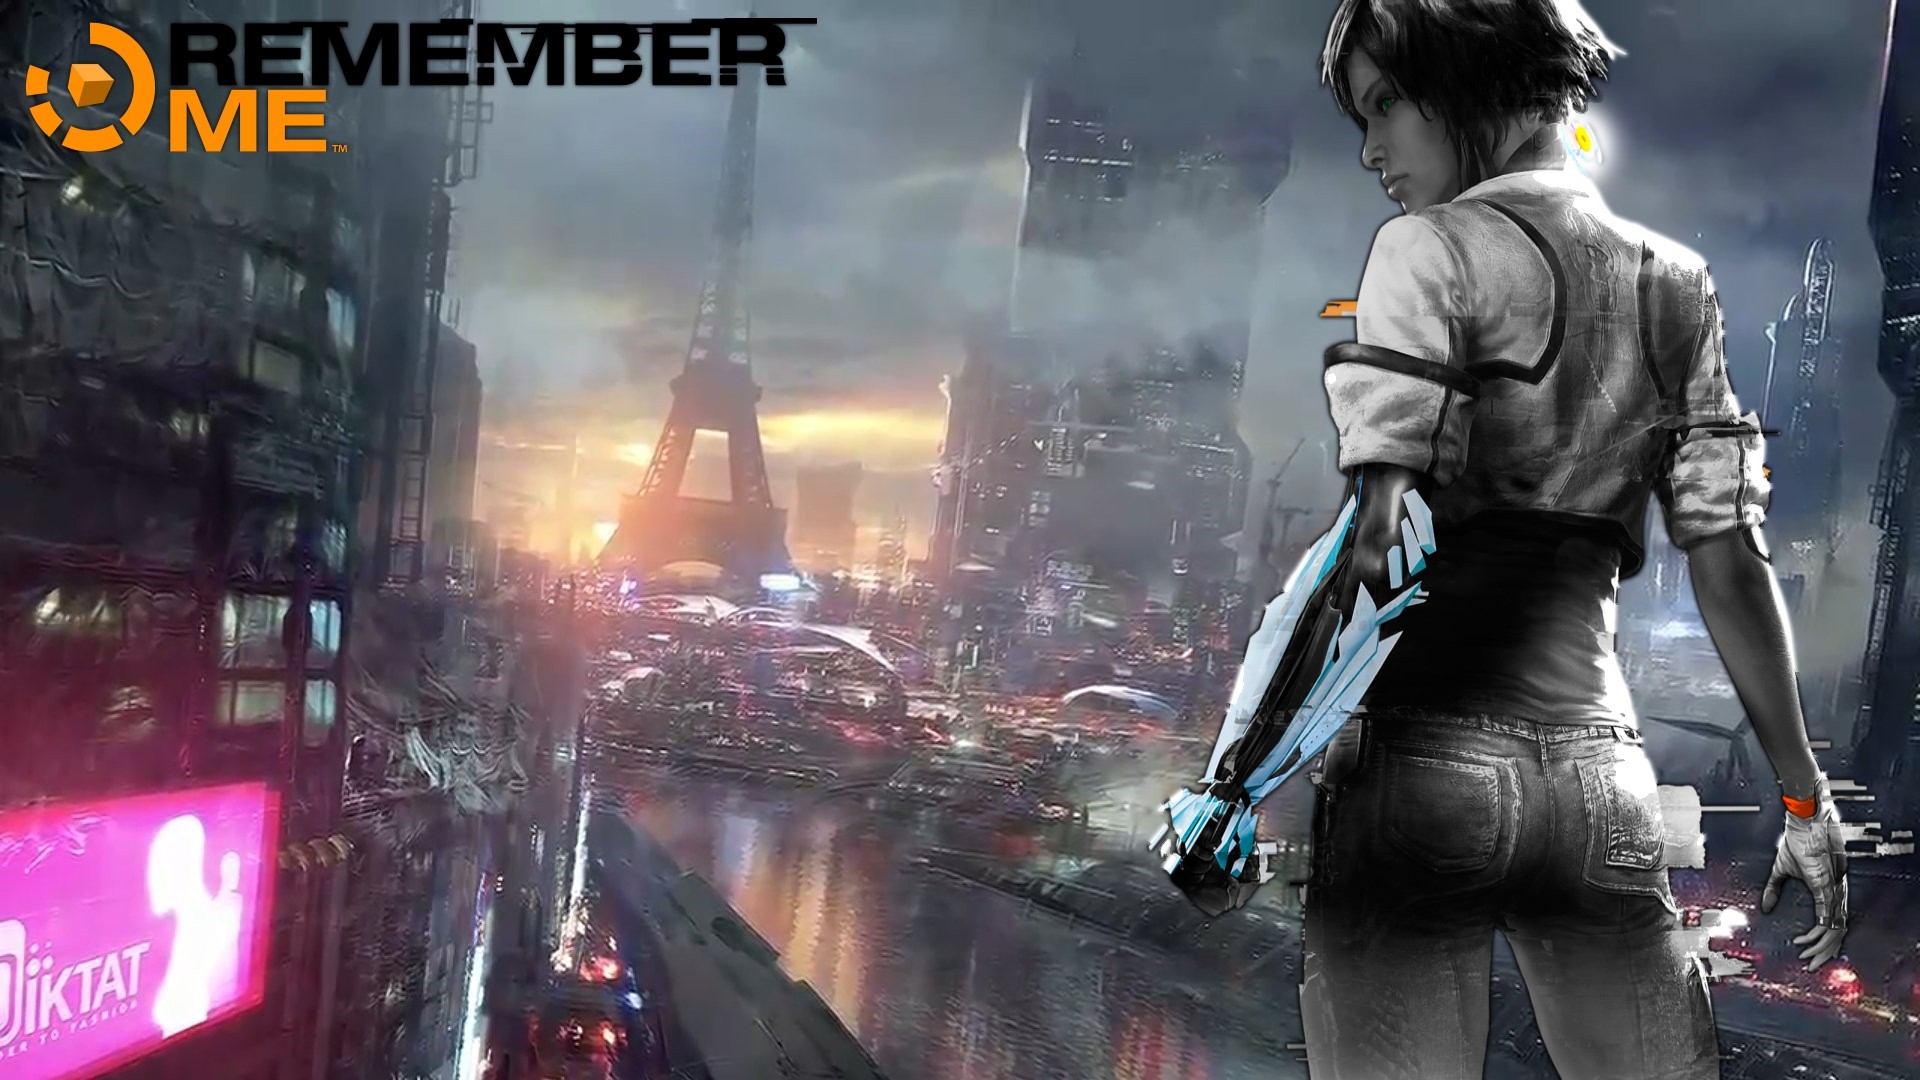 General 1920x1080 PC gaming Remember Me Nilin  Eiffel Tower video games science fiction Paris futuristic futuristic city science fiction women video game girls